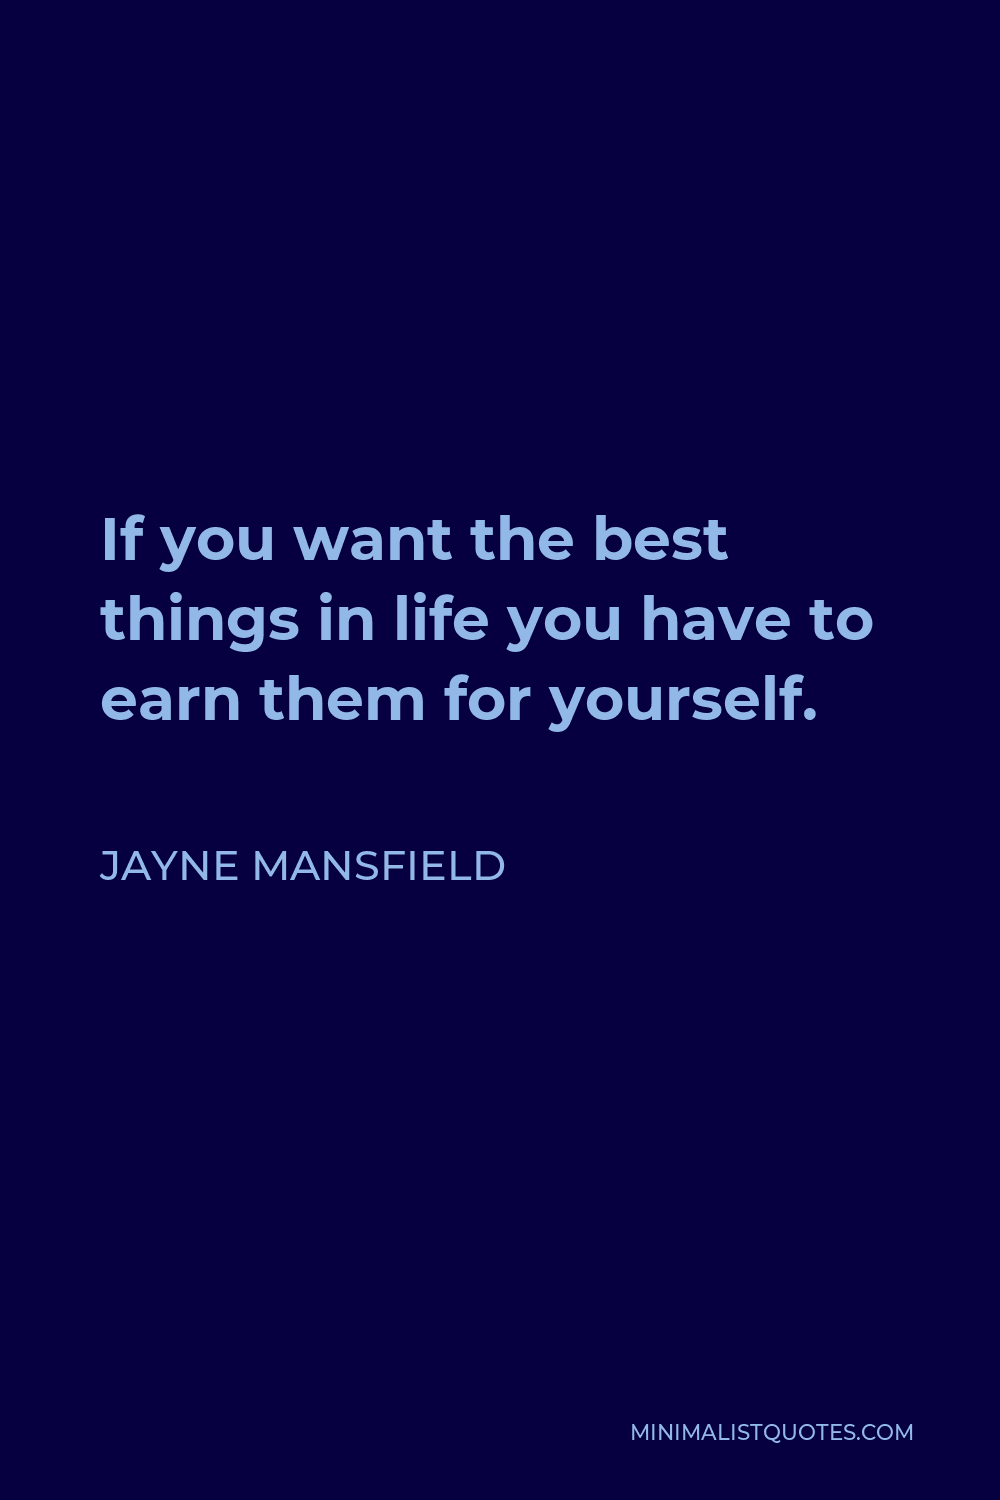 Jayne Mansfield Quote - If you want the best things in life you have to earn them for yourself.